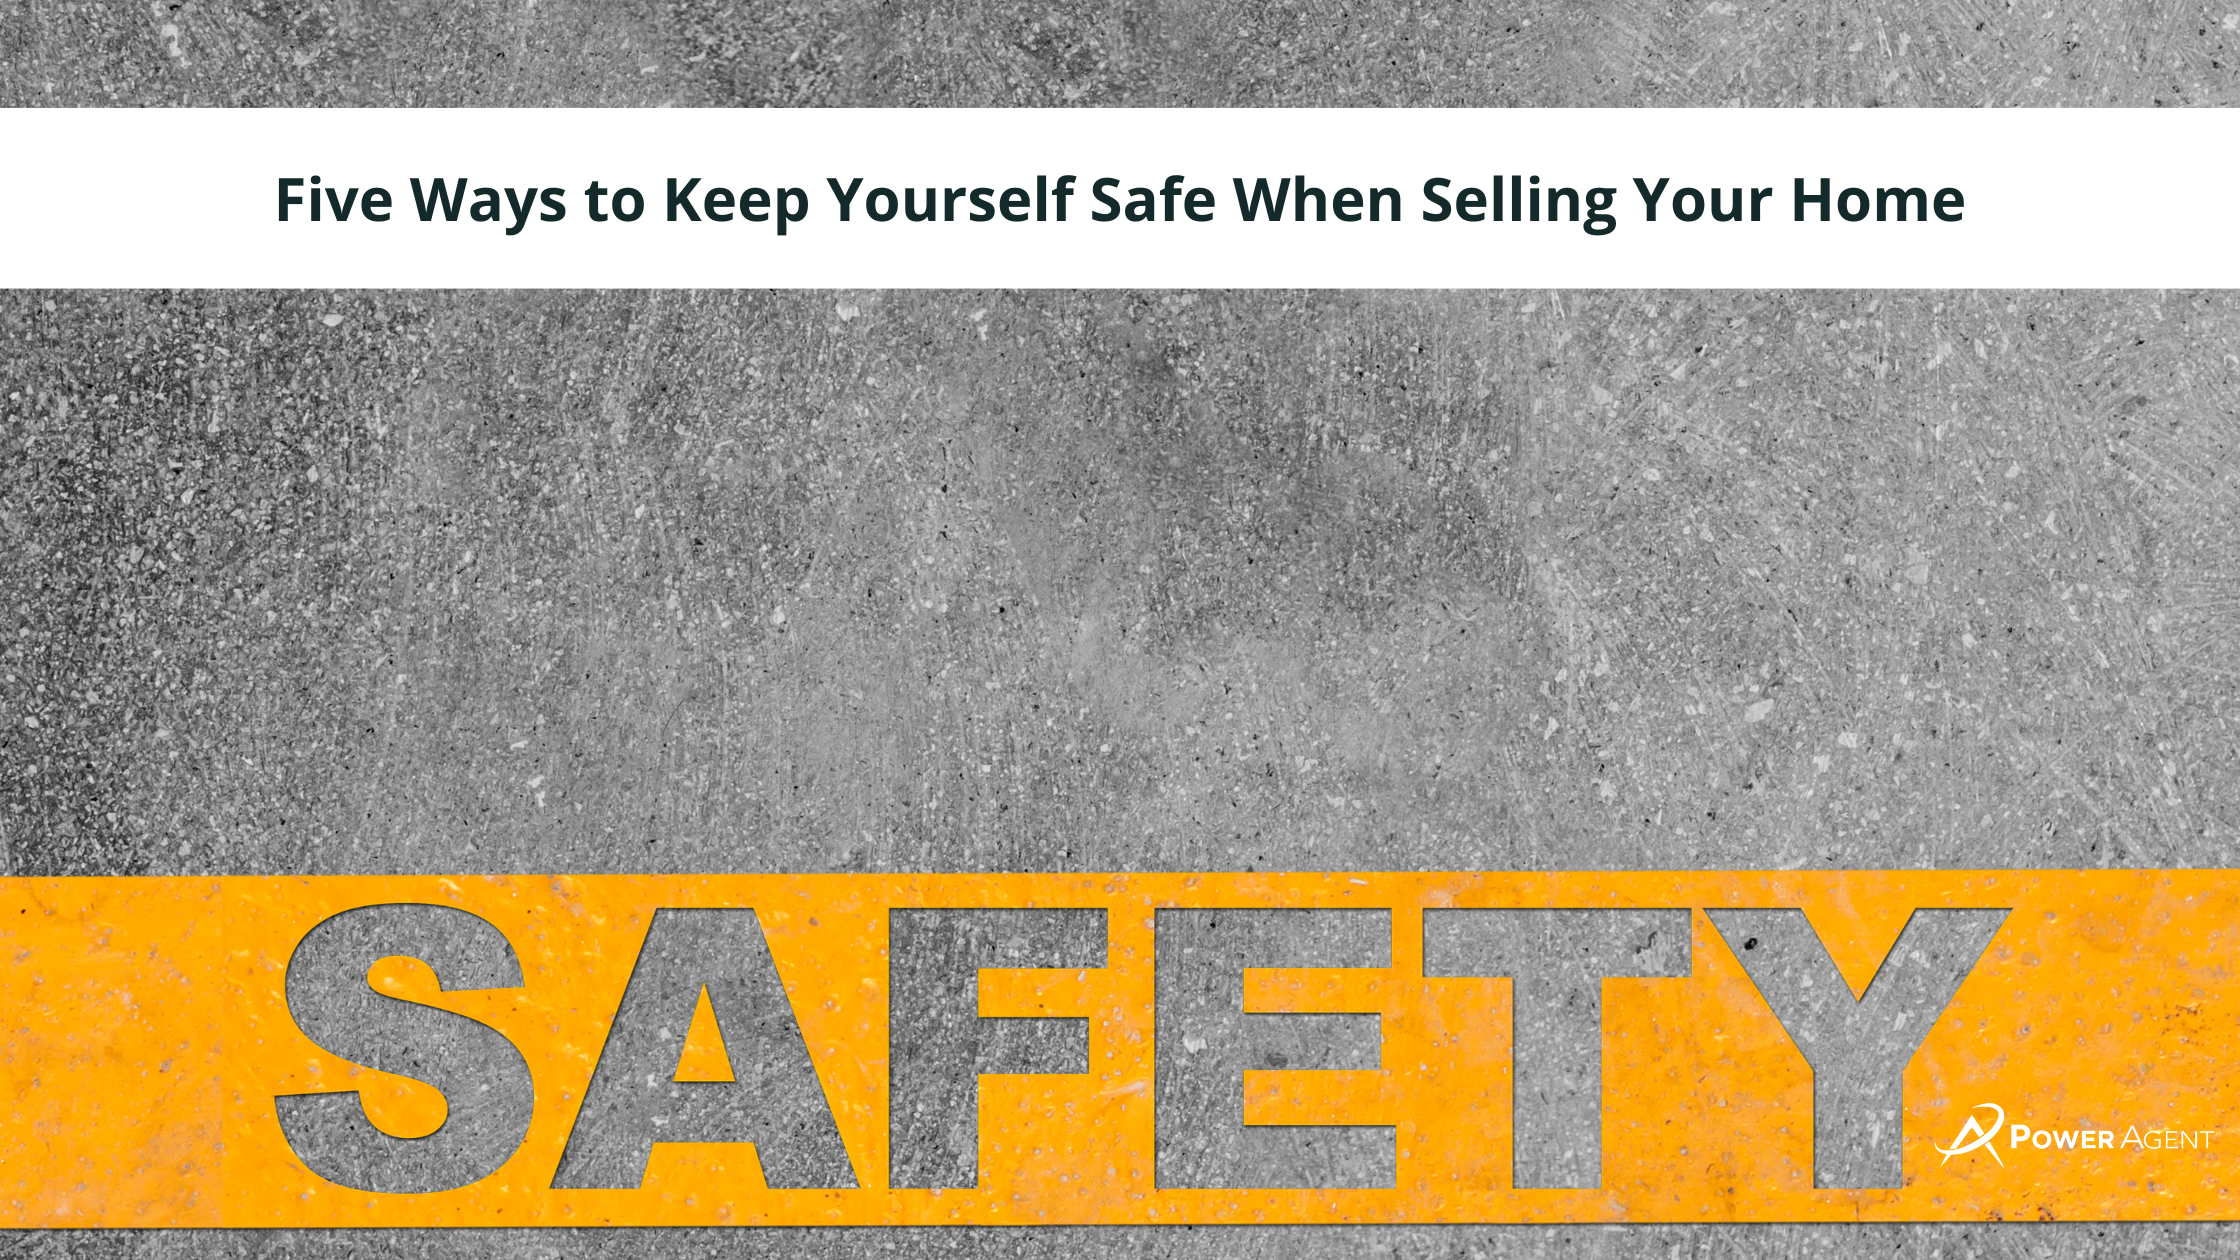 Five Ways to Keep Yourself Safe When Selling Your Home